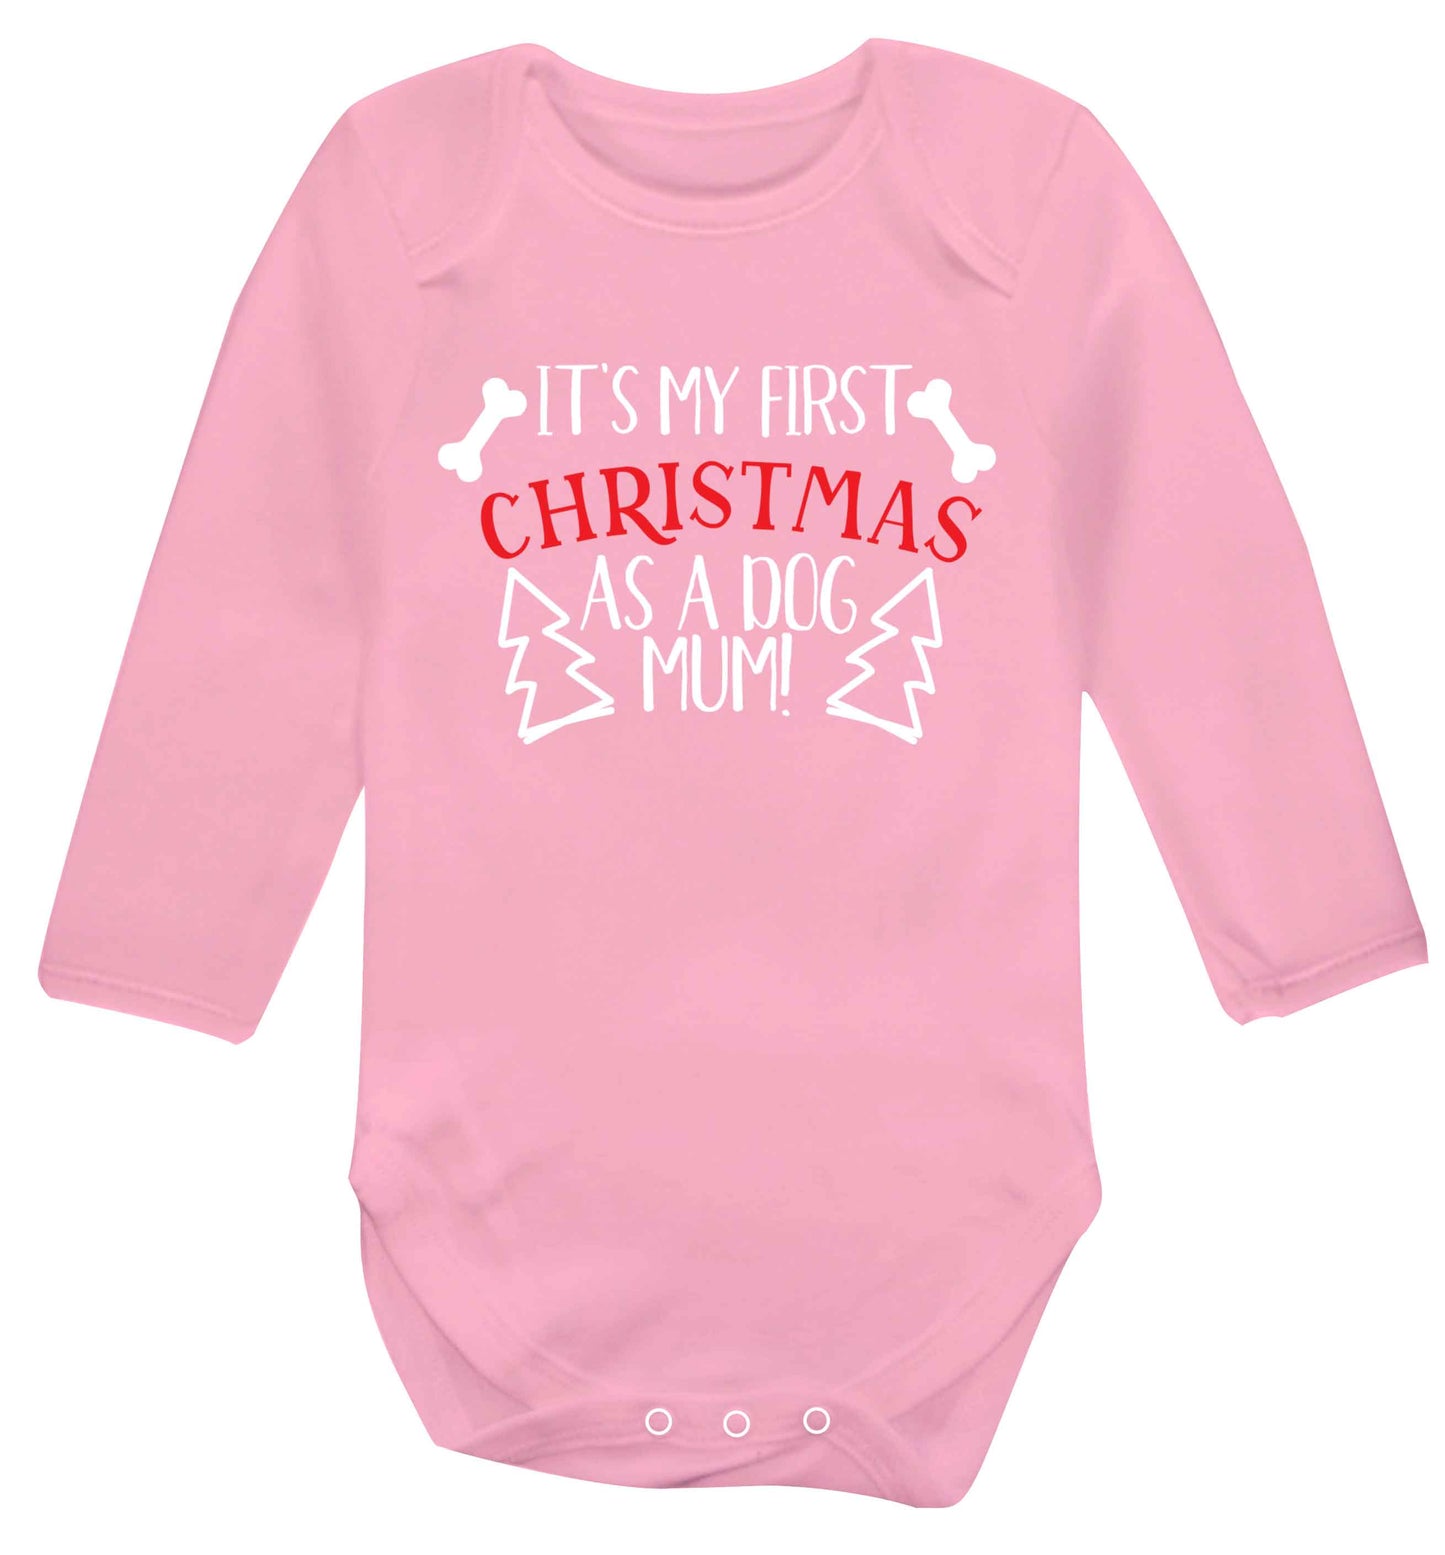 It's my first Christmas as a dog mum! Baby Vest long sleeved pale pink 6-12 months